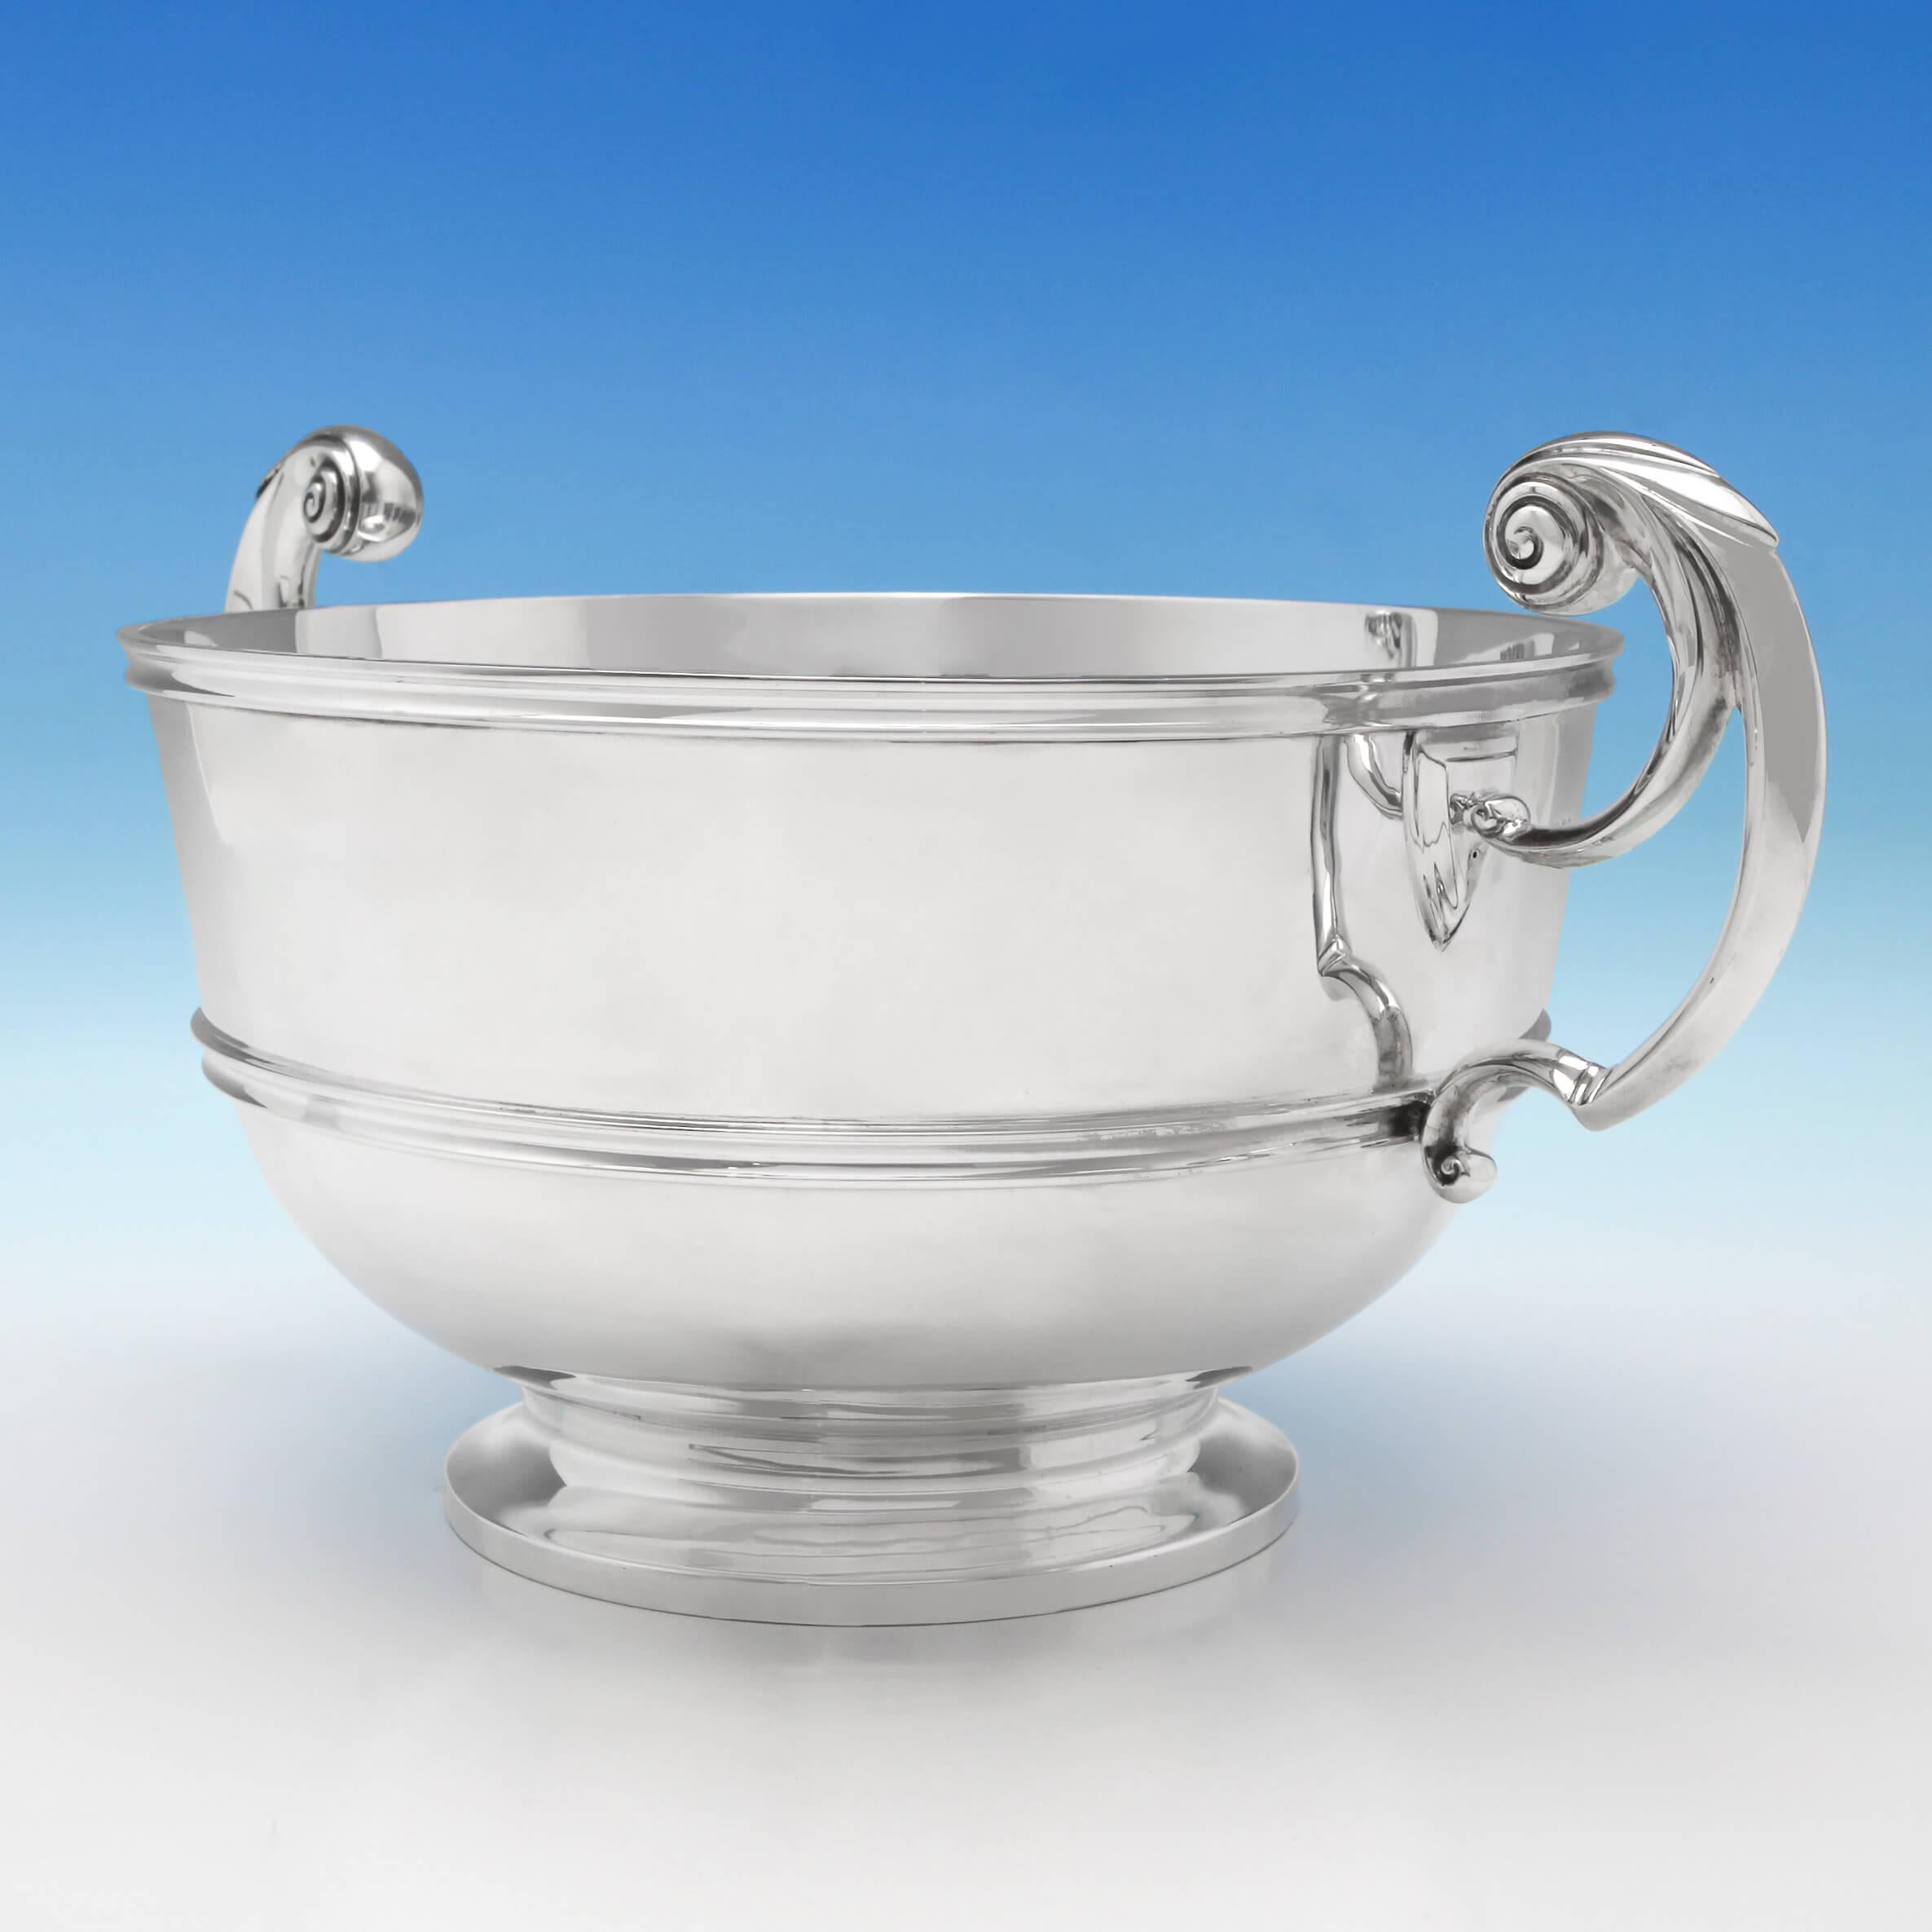 Hallmarked in London in 1903 by Charles Stuart Harris, this handsome, Edwardian, Antique Sterling Silver Bowl, stands on a pedestal base, and features harp handles and reed detailing. 

The bowl measures 7.5